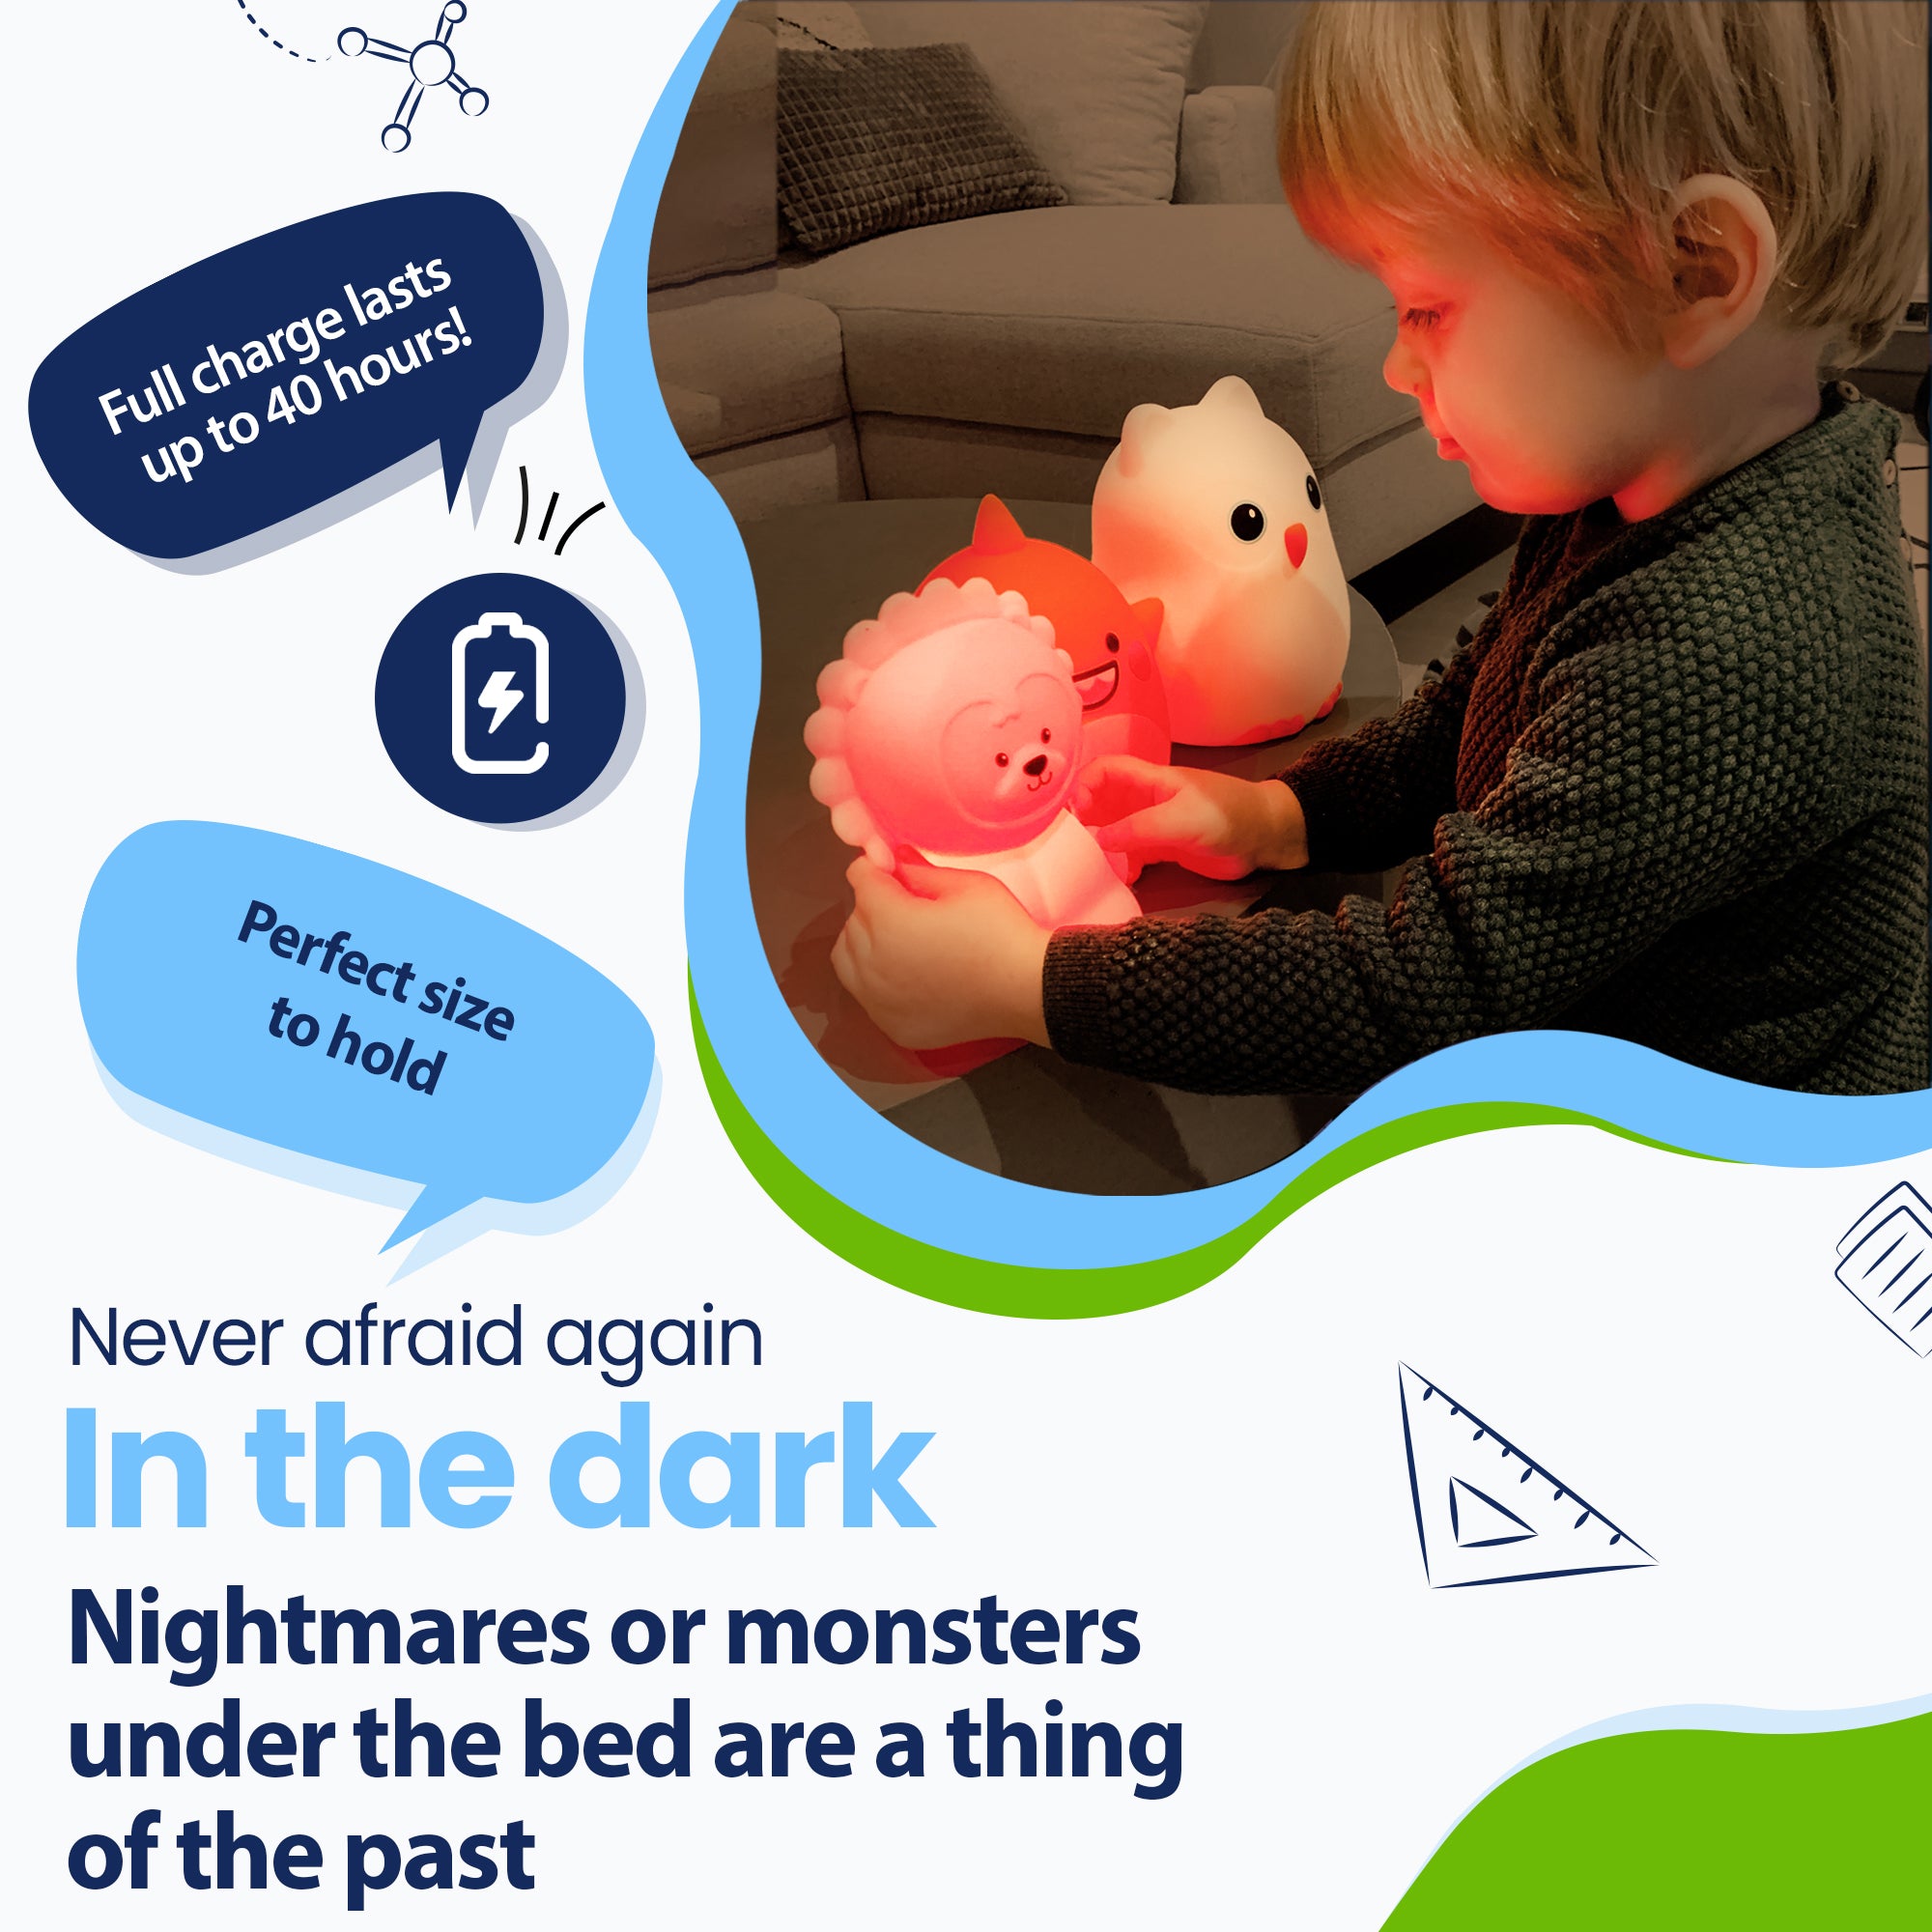 Never be afraid of the dark again - Nightmares or monsters under the bed are a thing of the past - Lasts up to 40 hours - Perfect size to hold